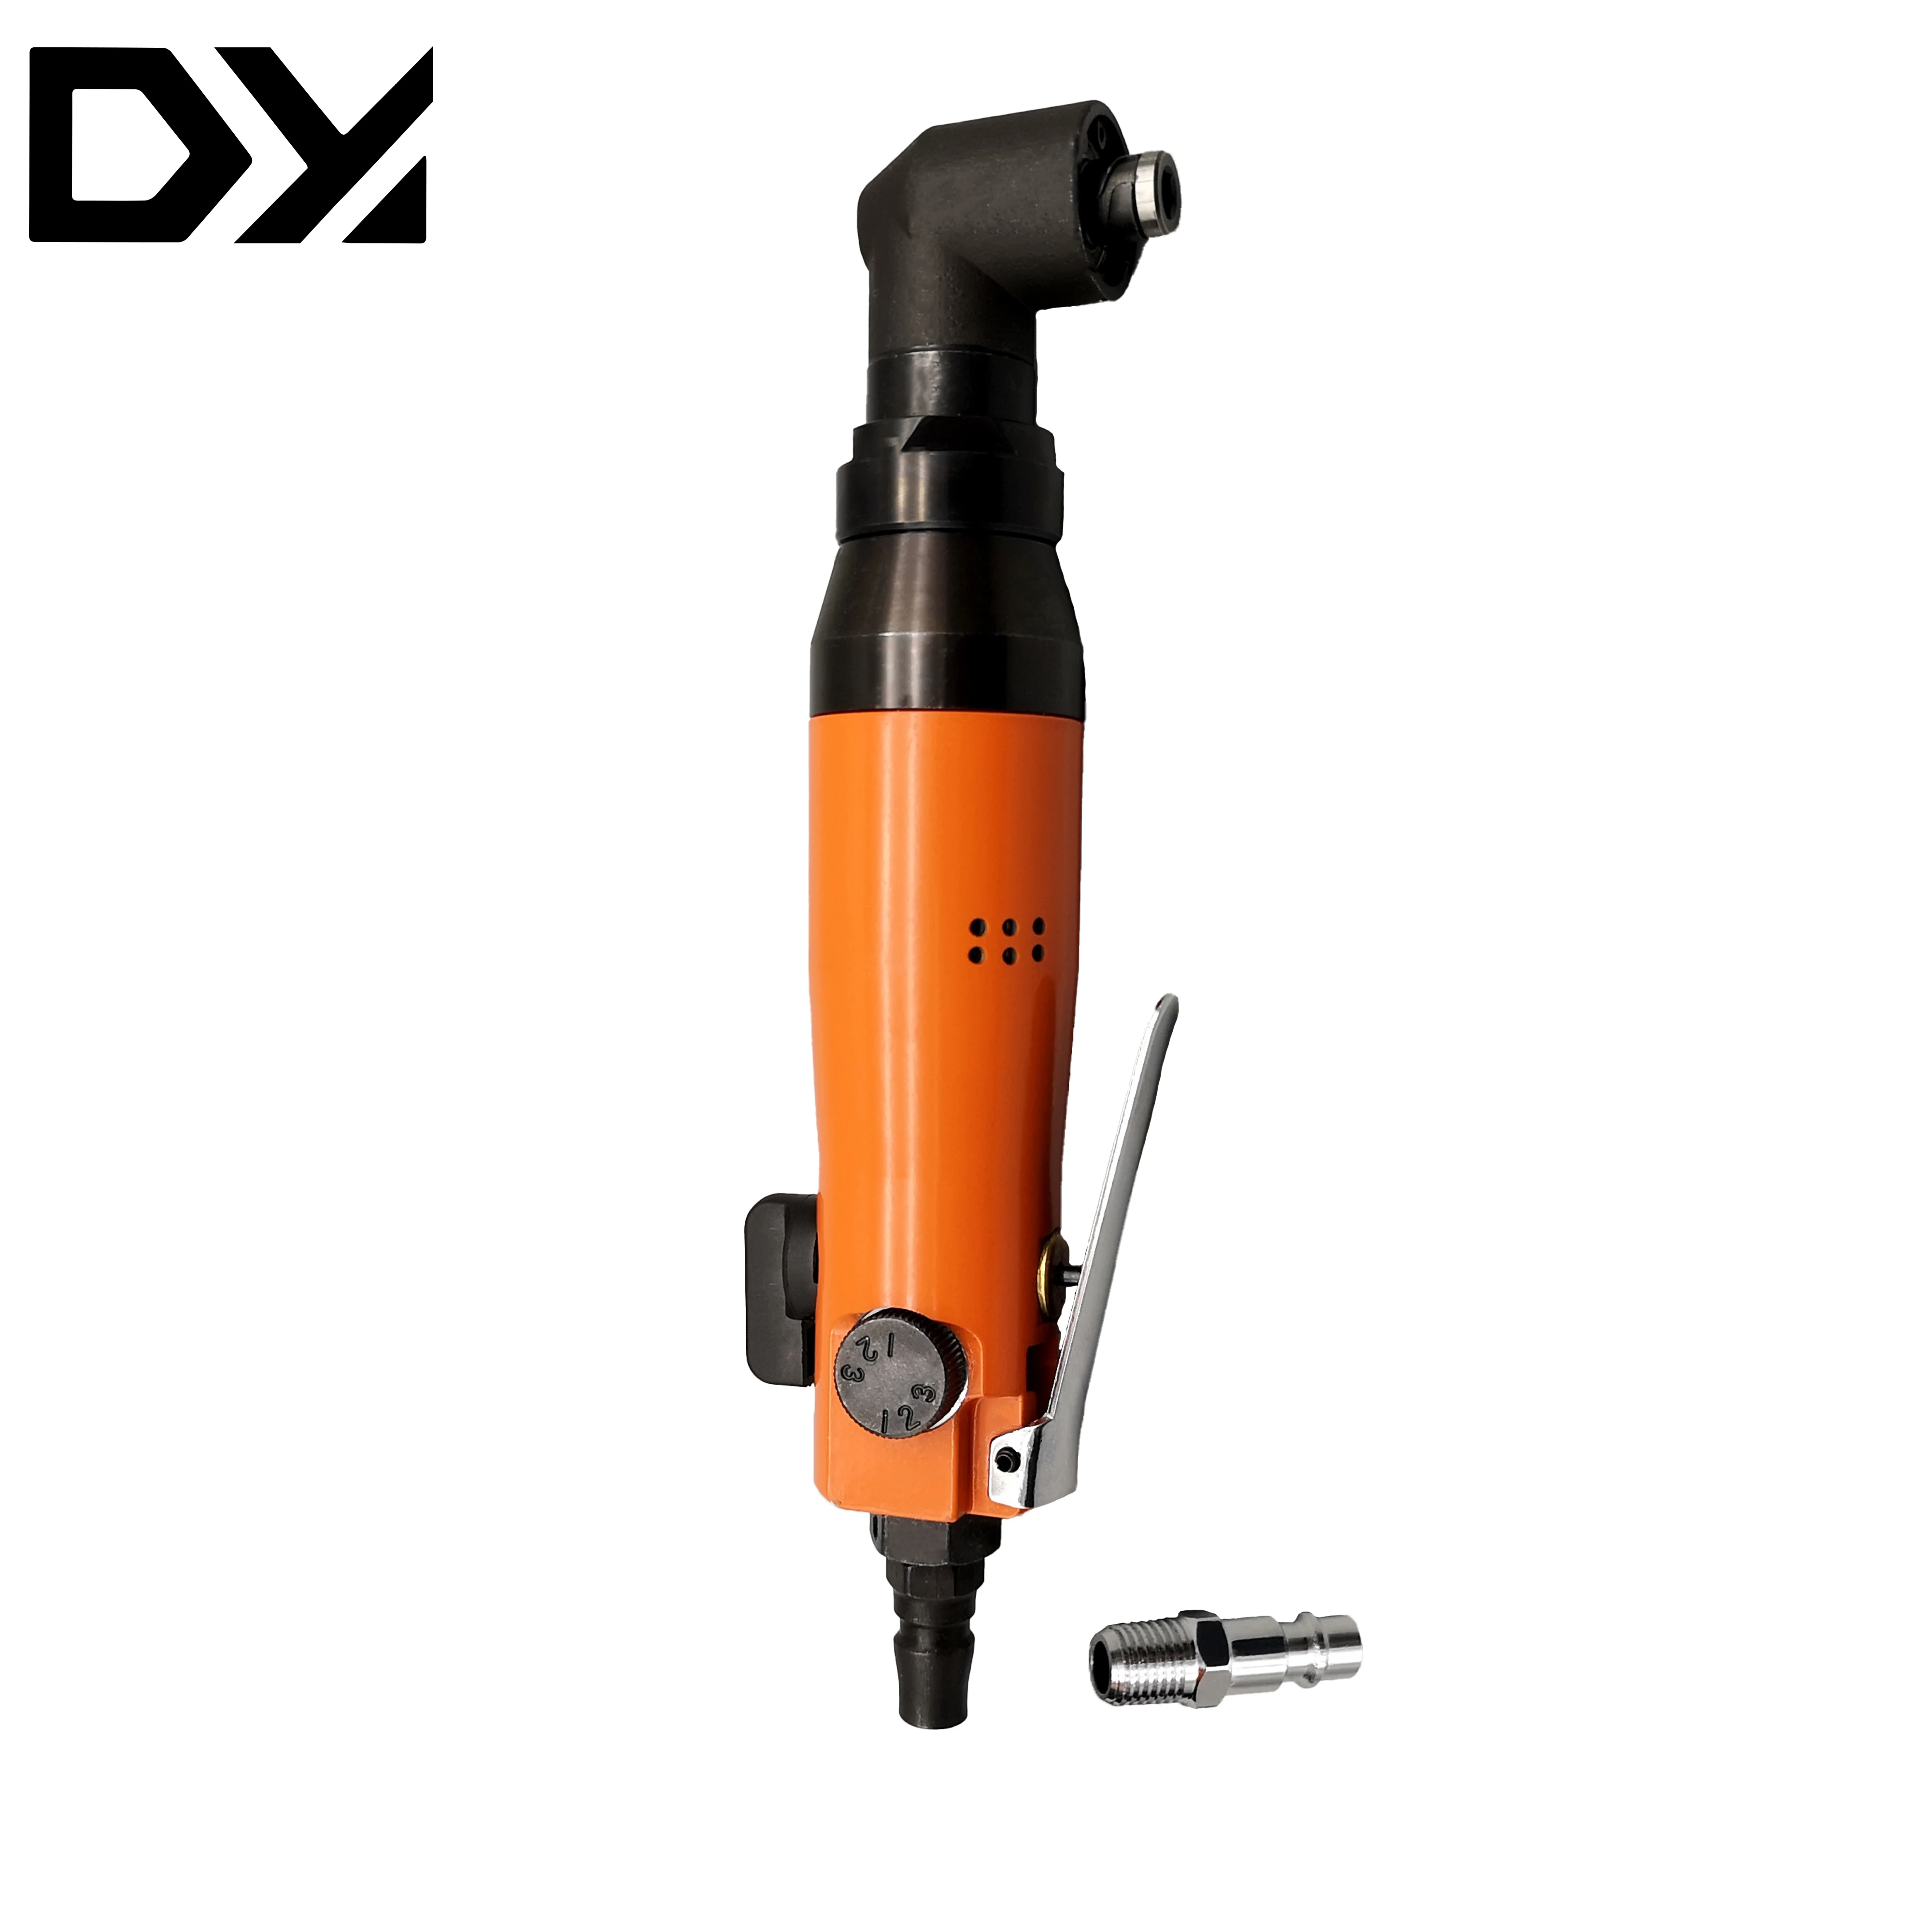 DA-YA 6H High-quality Air Screwdriver Right Angle Head Type Pneumatic Hand Drill Wind Driver Tapping Machine Tools